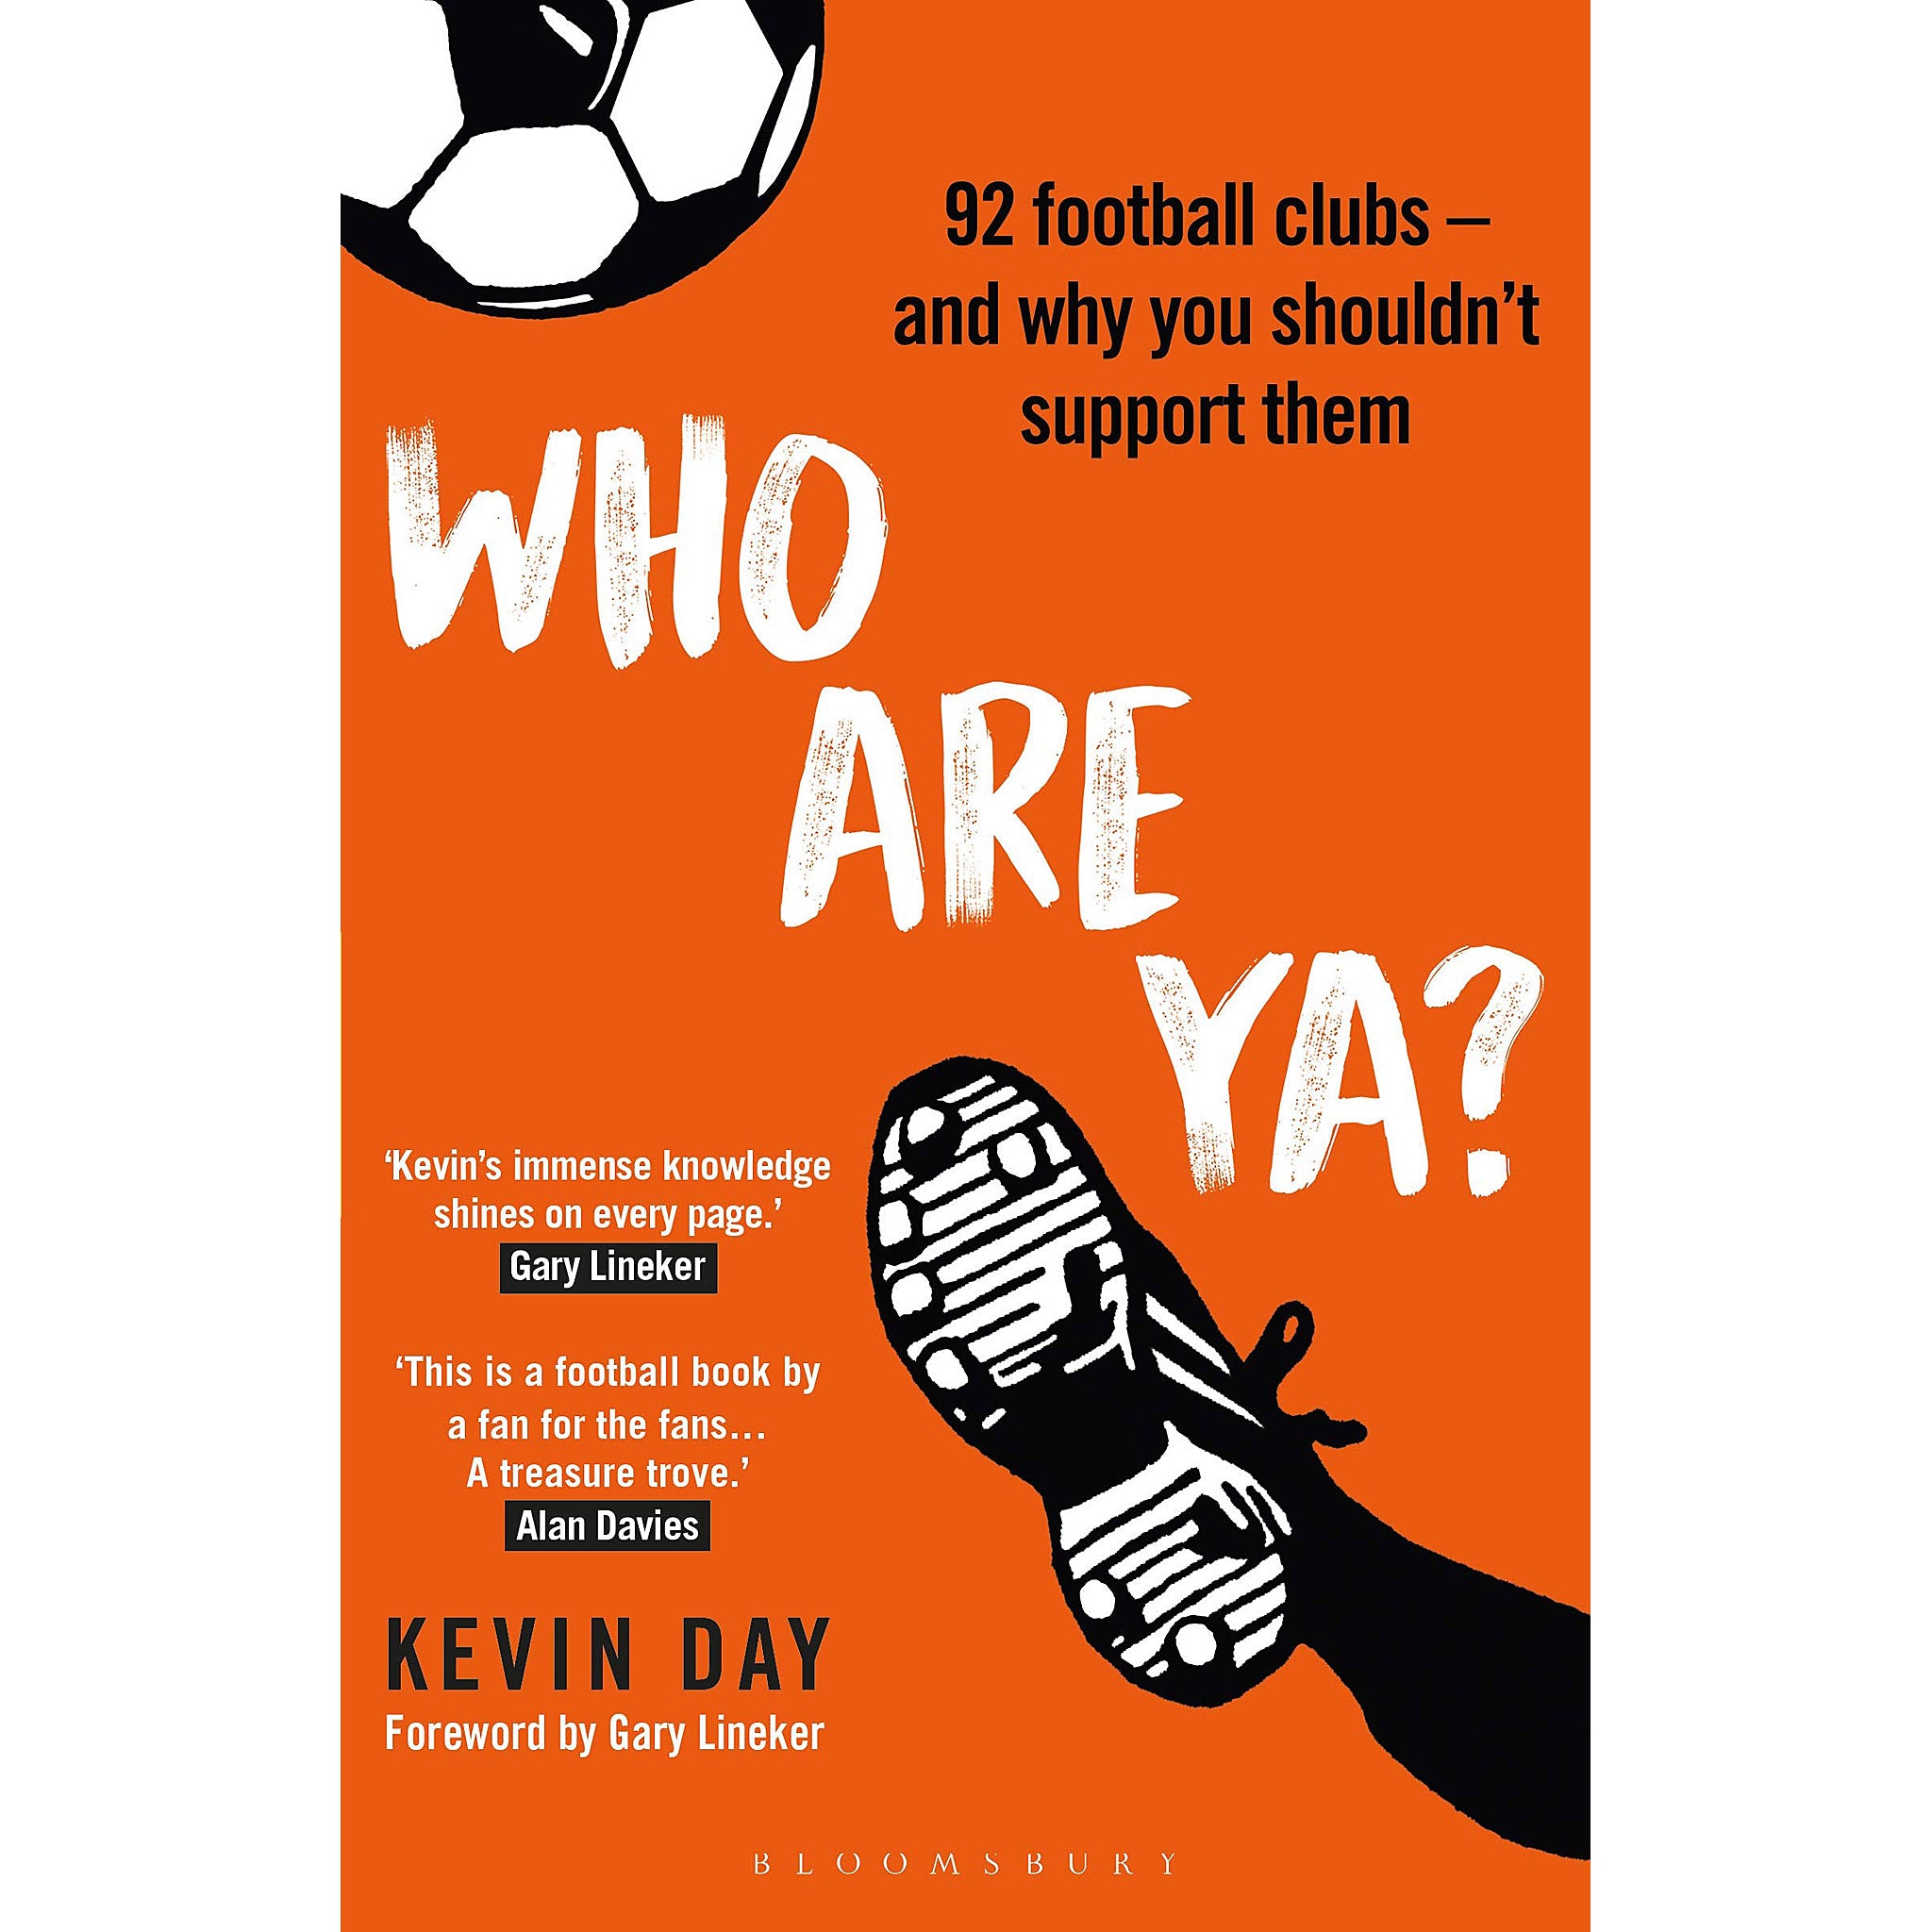 Who Are Ya? 92 football clubs – and why you probably shouldn't support them